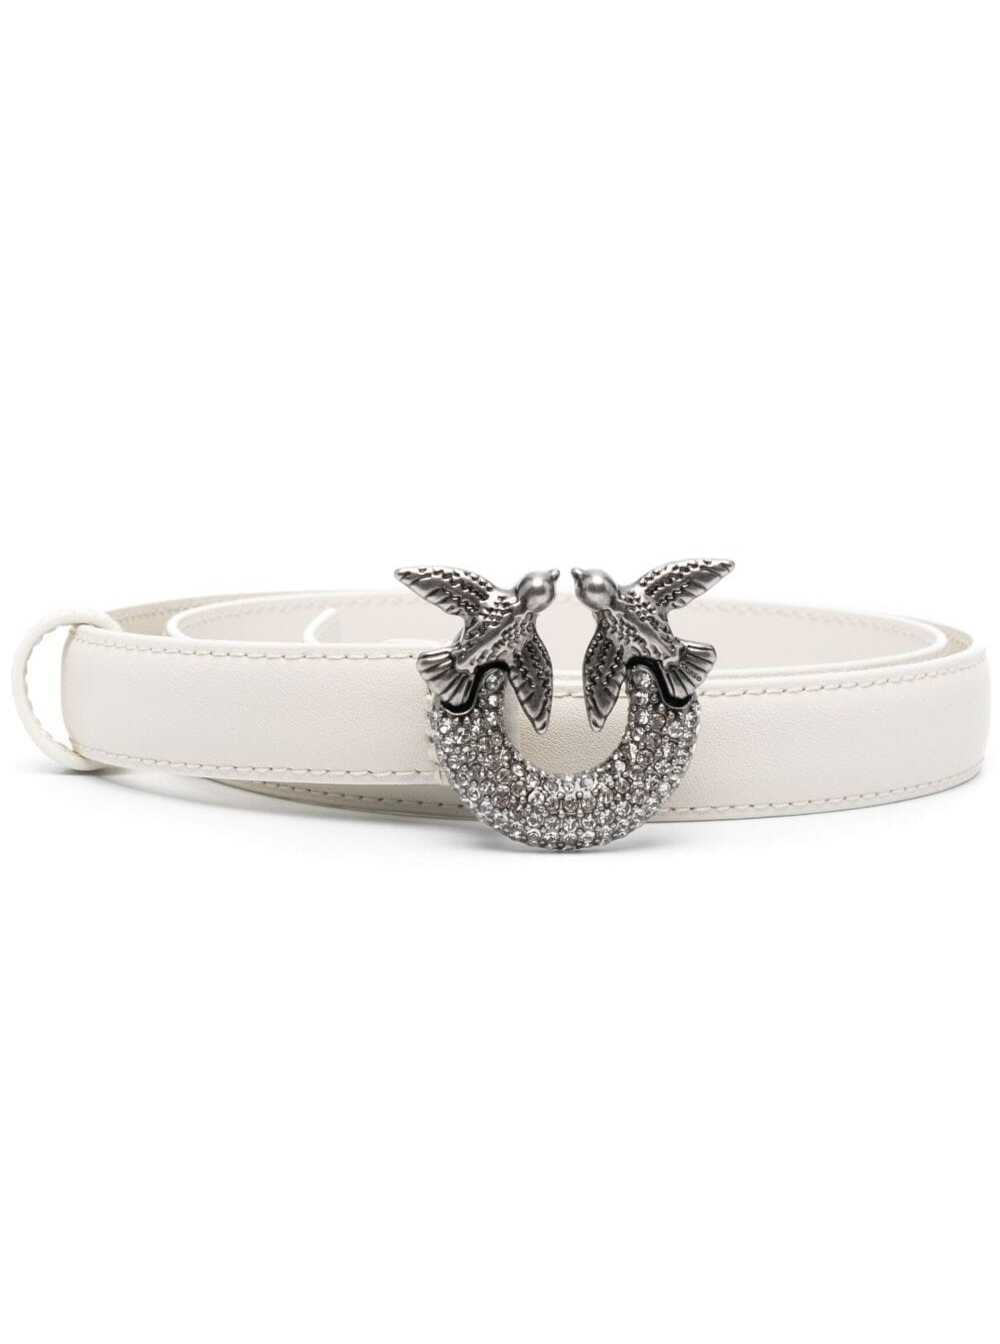 PINKO WHITE BELT WTH LOVE BIRDS BUCKLE AND STRASS IN LEATHER WOMAN